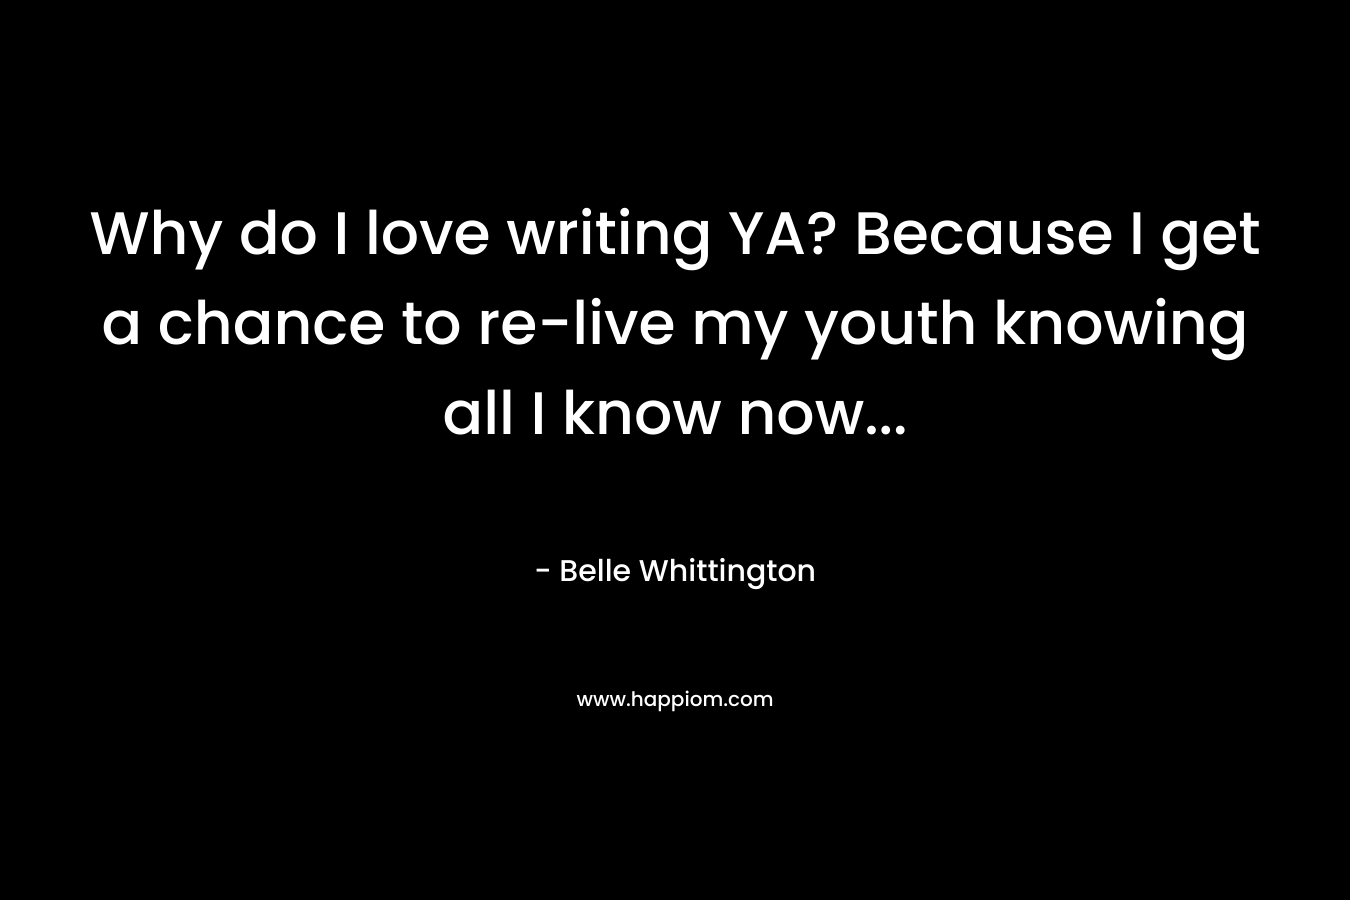 Why do I love writing YA? Because I get a chance to re-live my youth knowing all I know now… – Belle Whittington